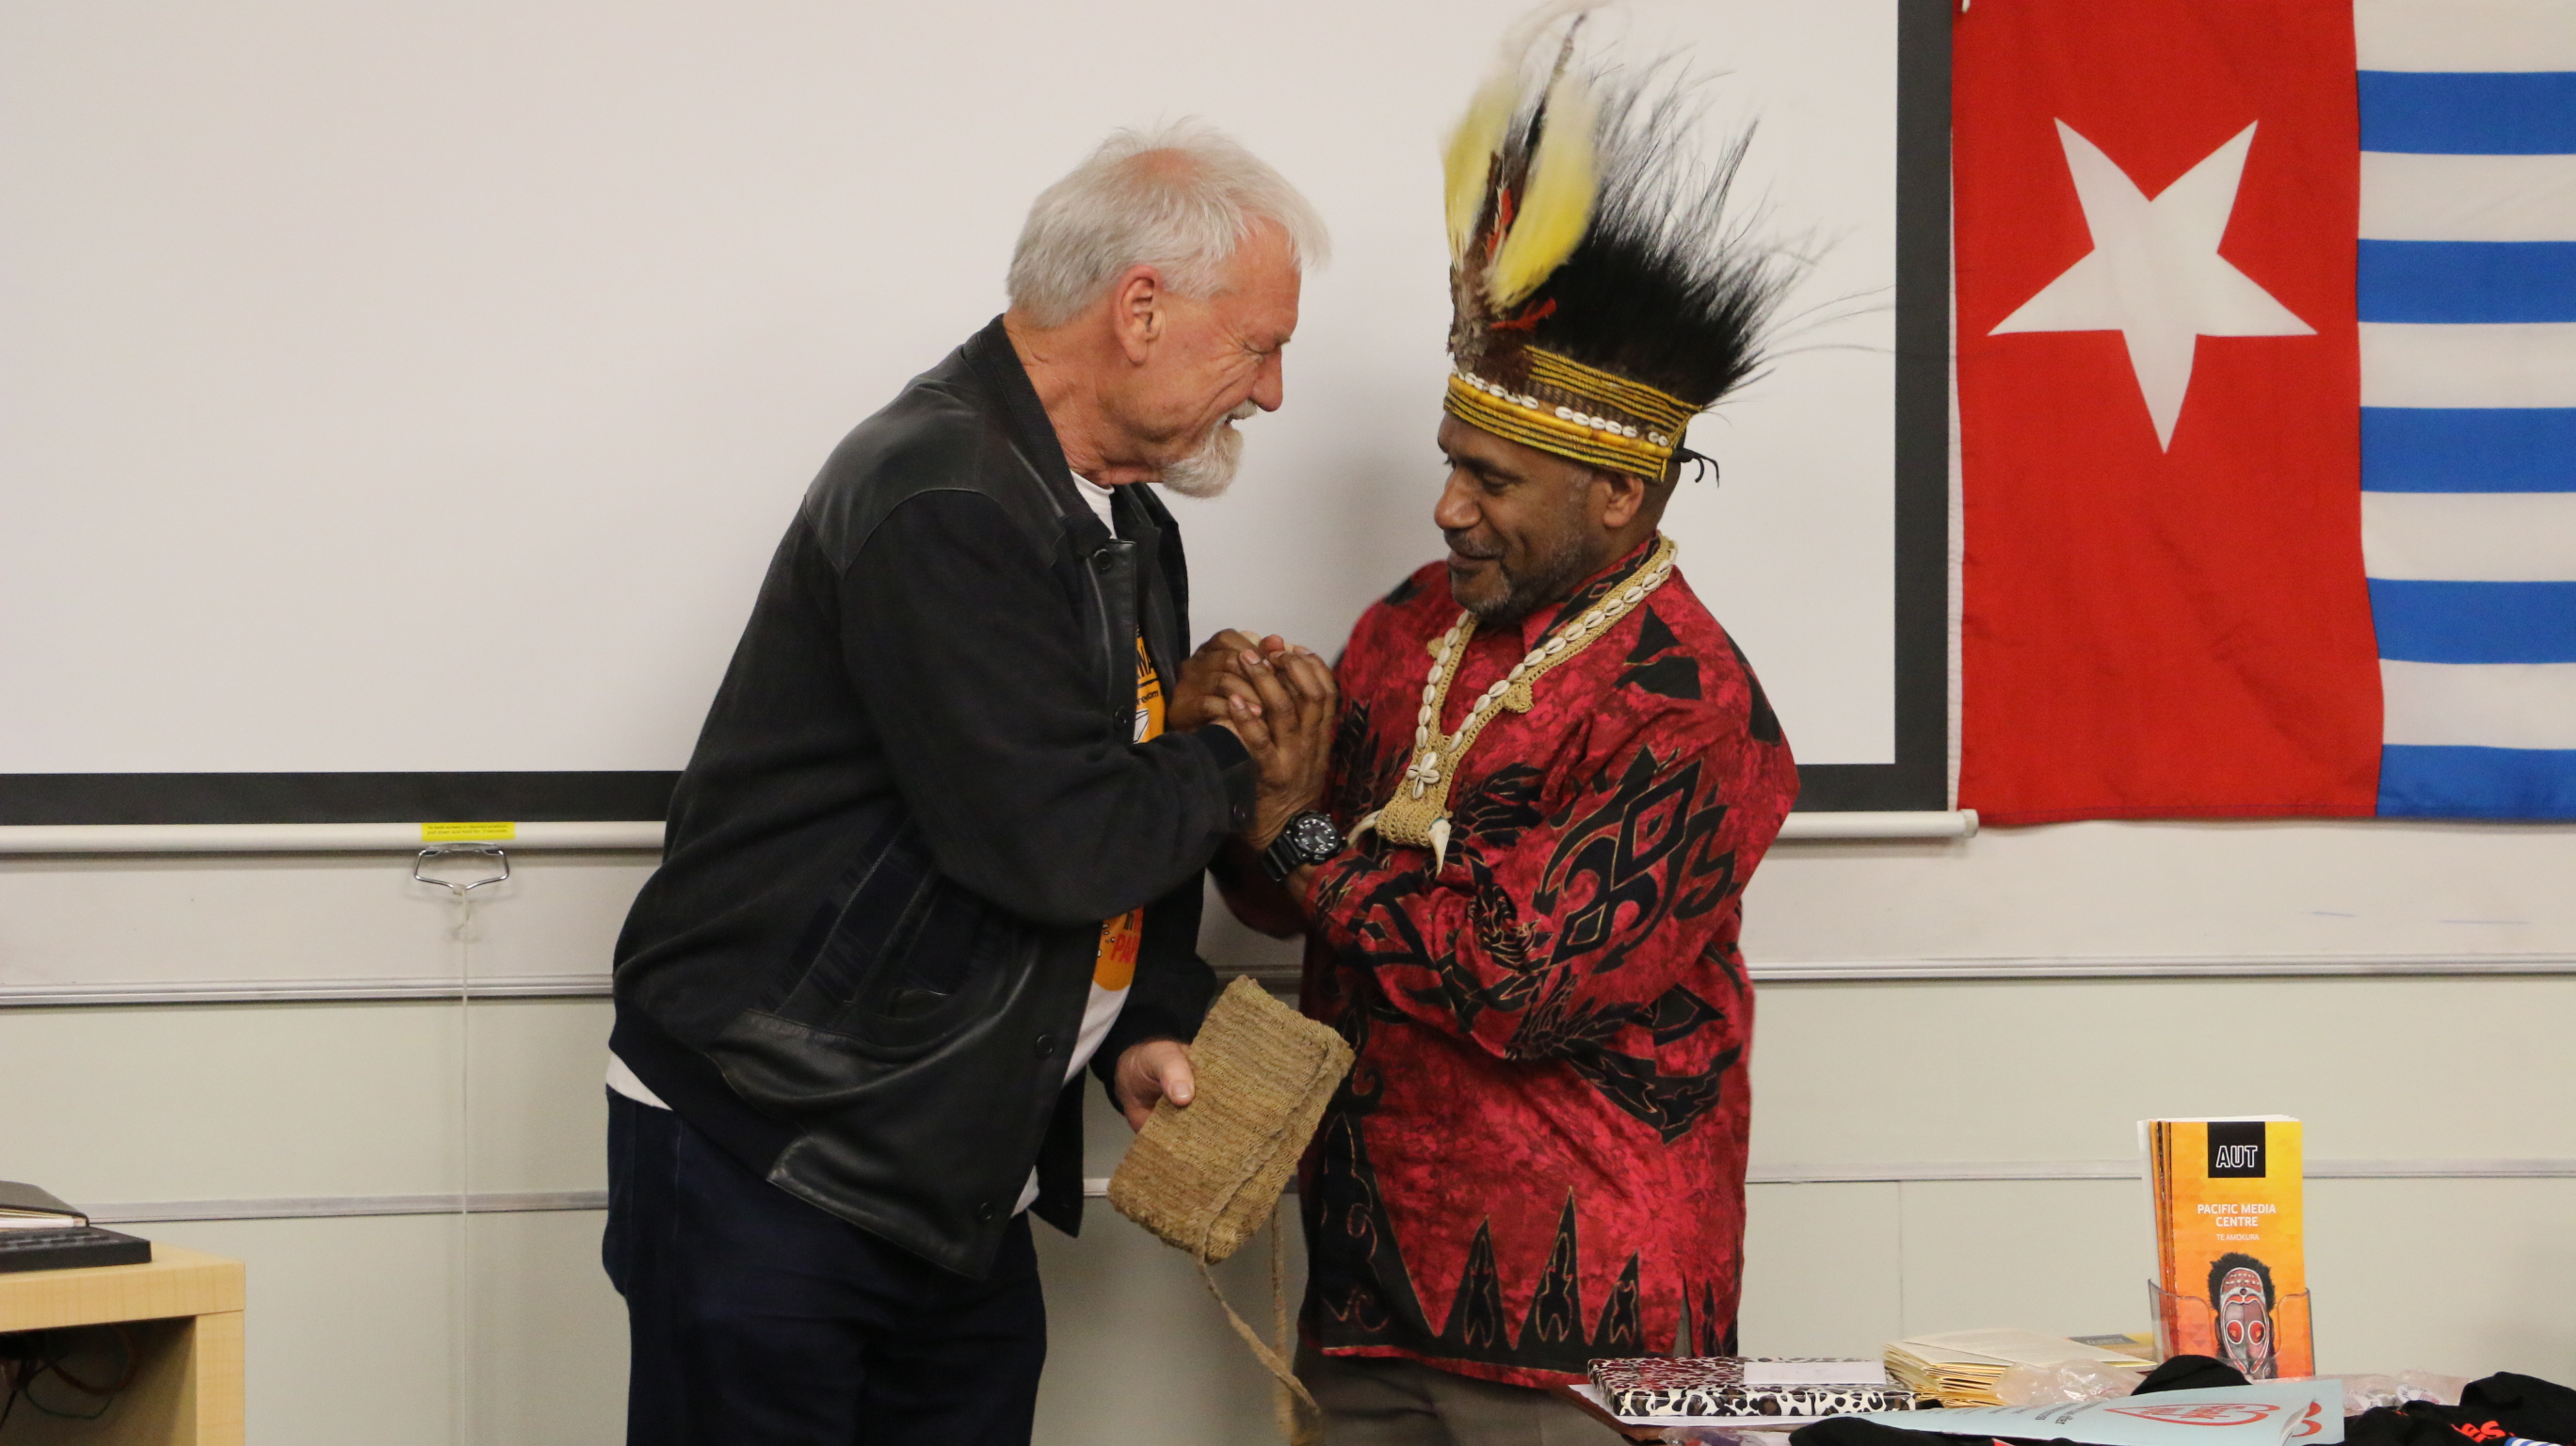 Free West Papua advocate Benny Wenda presents Pacific Media Centre Professor David Robie with a traditional “bilum” for his journalism about West Papuan freedom. Image: Kendall Hutt/PMC